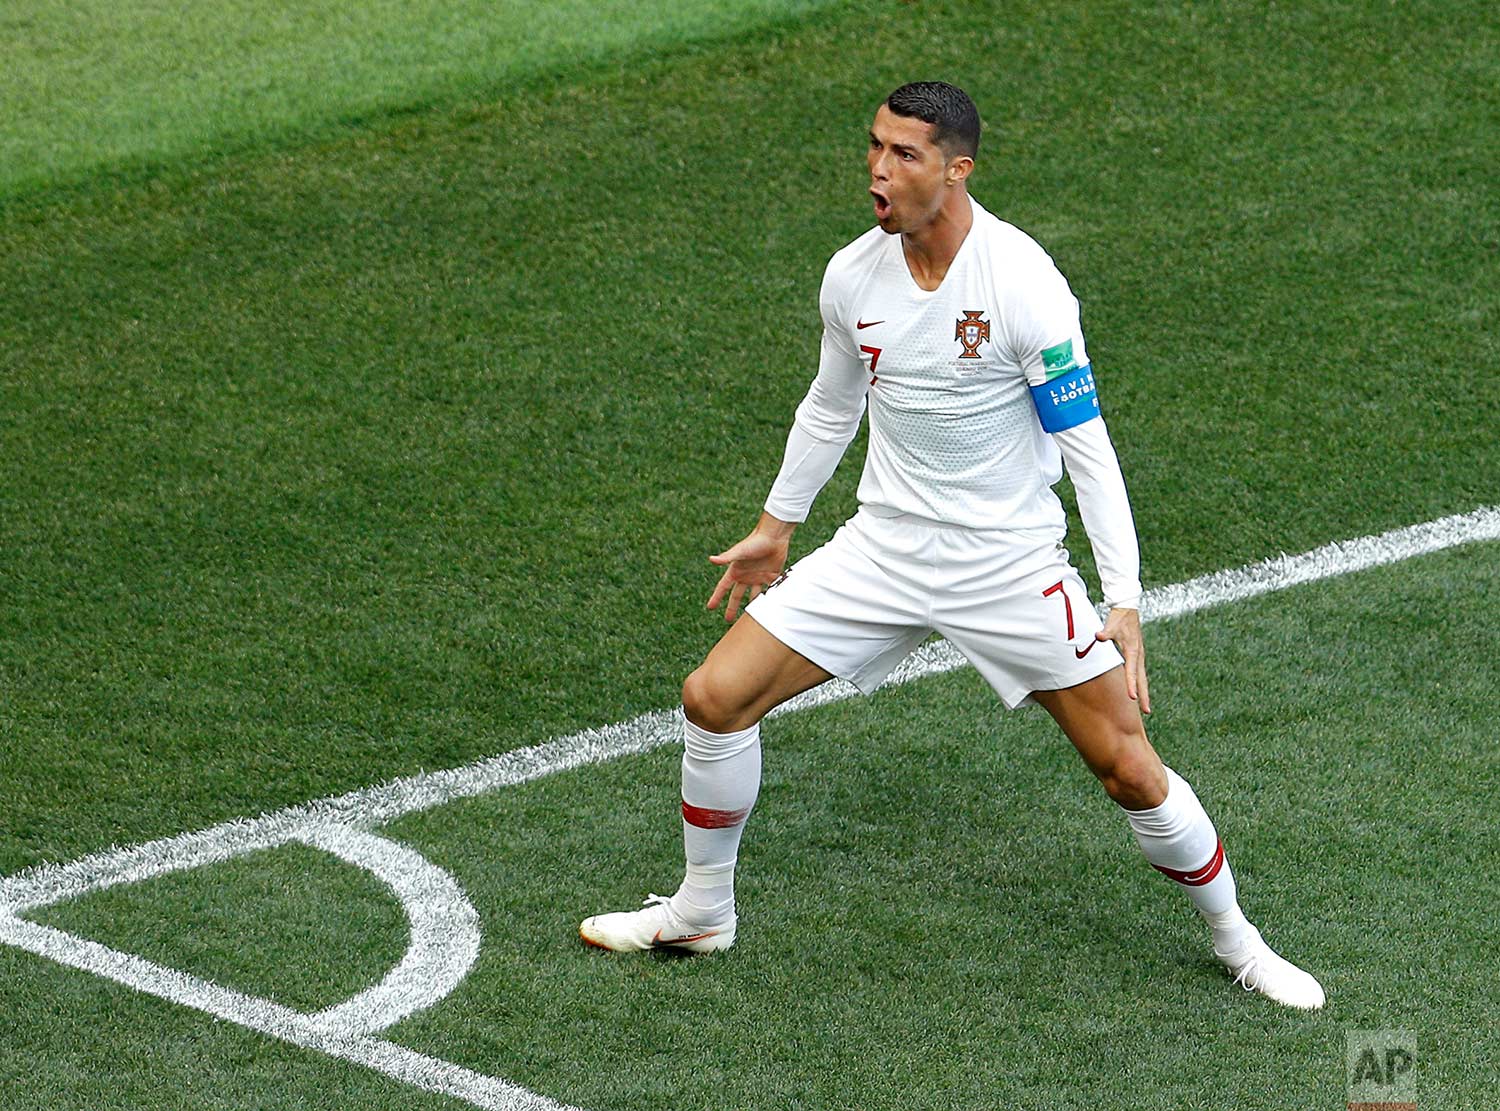  Portugal's Cristiano Ronaldo celebrates after scoring the opening goal during the group B match between Portugal and Morocco at the 2018 soccer World Cup in the Luzhniki Stadium in Moscow, Russia, Wednesday, June 20, 2018. (AP Photo/Victor Caivano) 